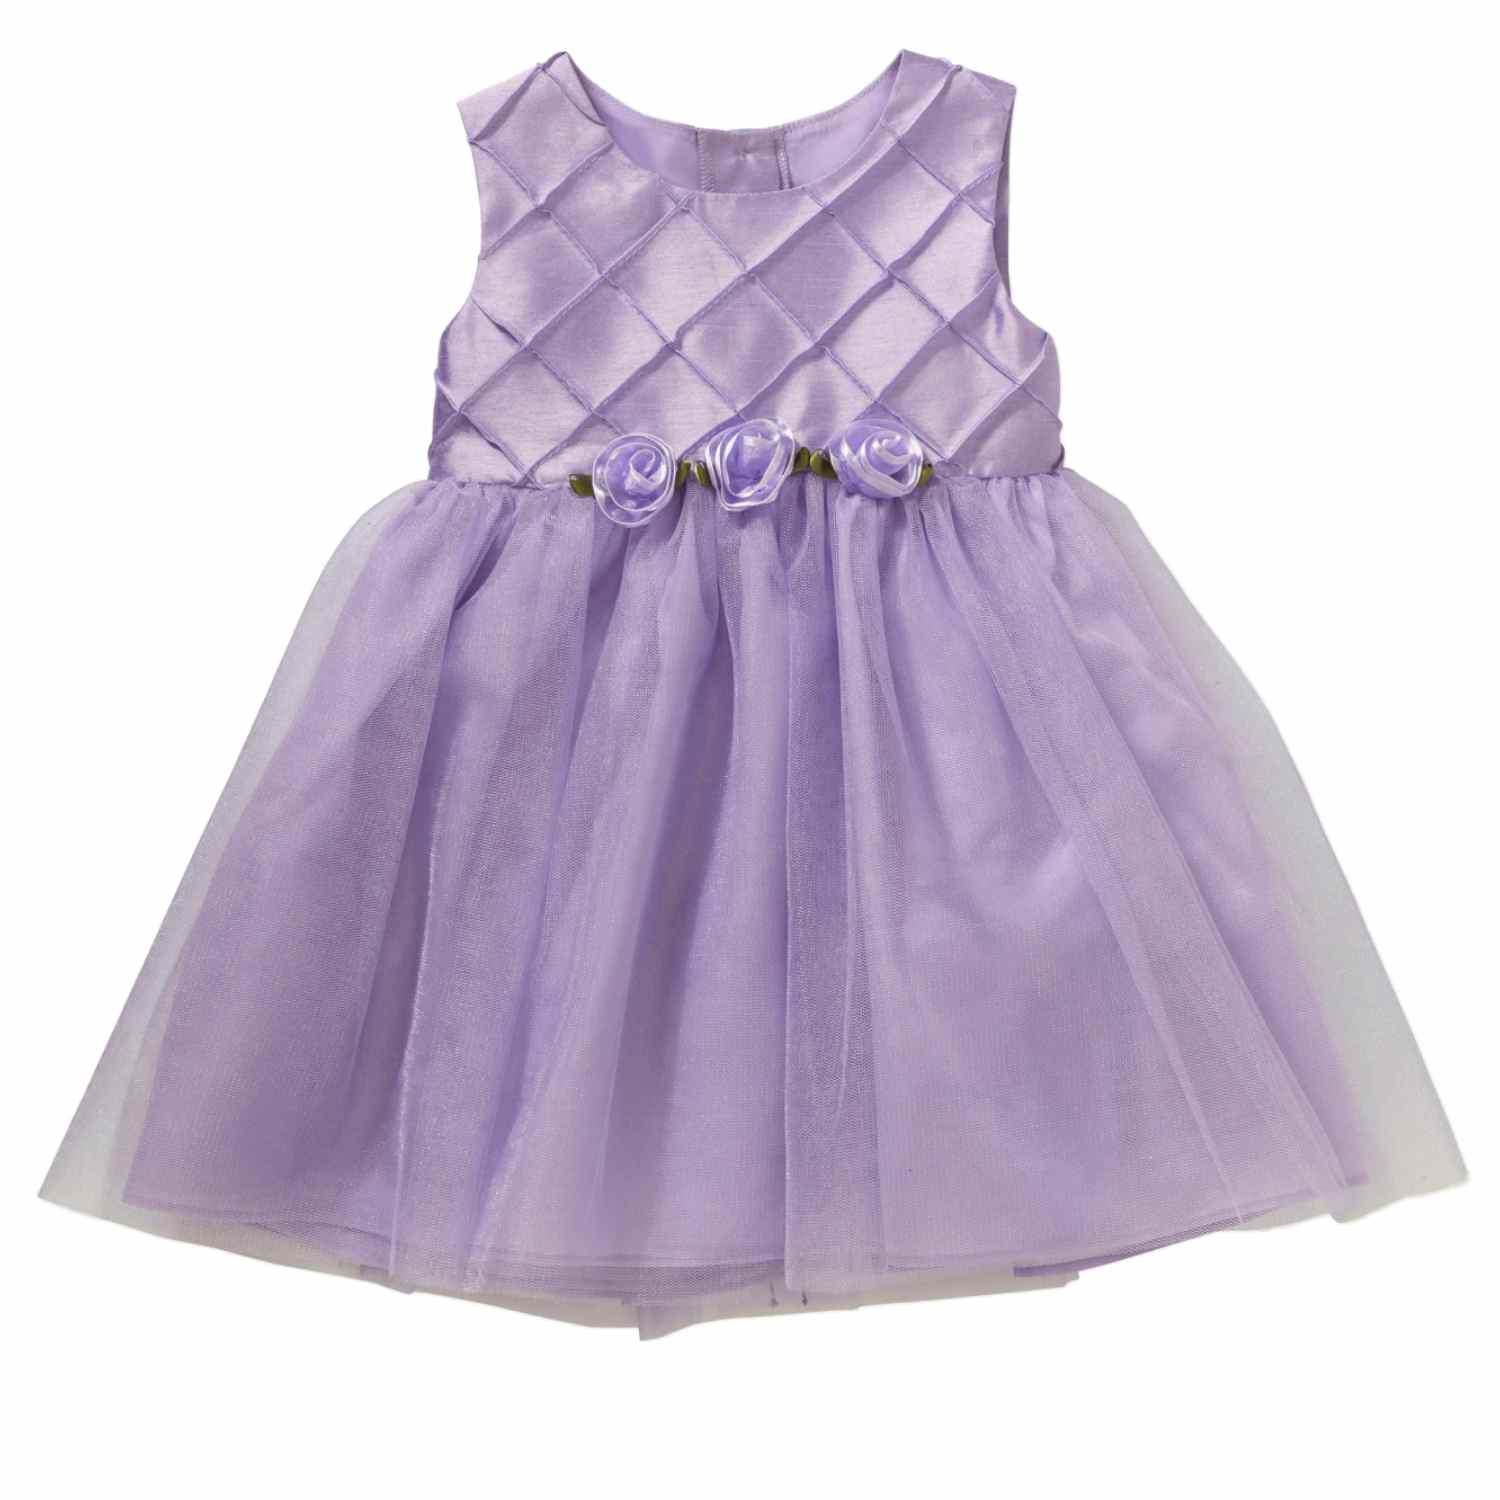 GEORGE Toddler Girls Purple Satin & Tulle Easter & Party Dress